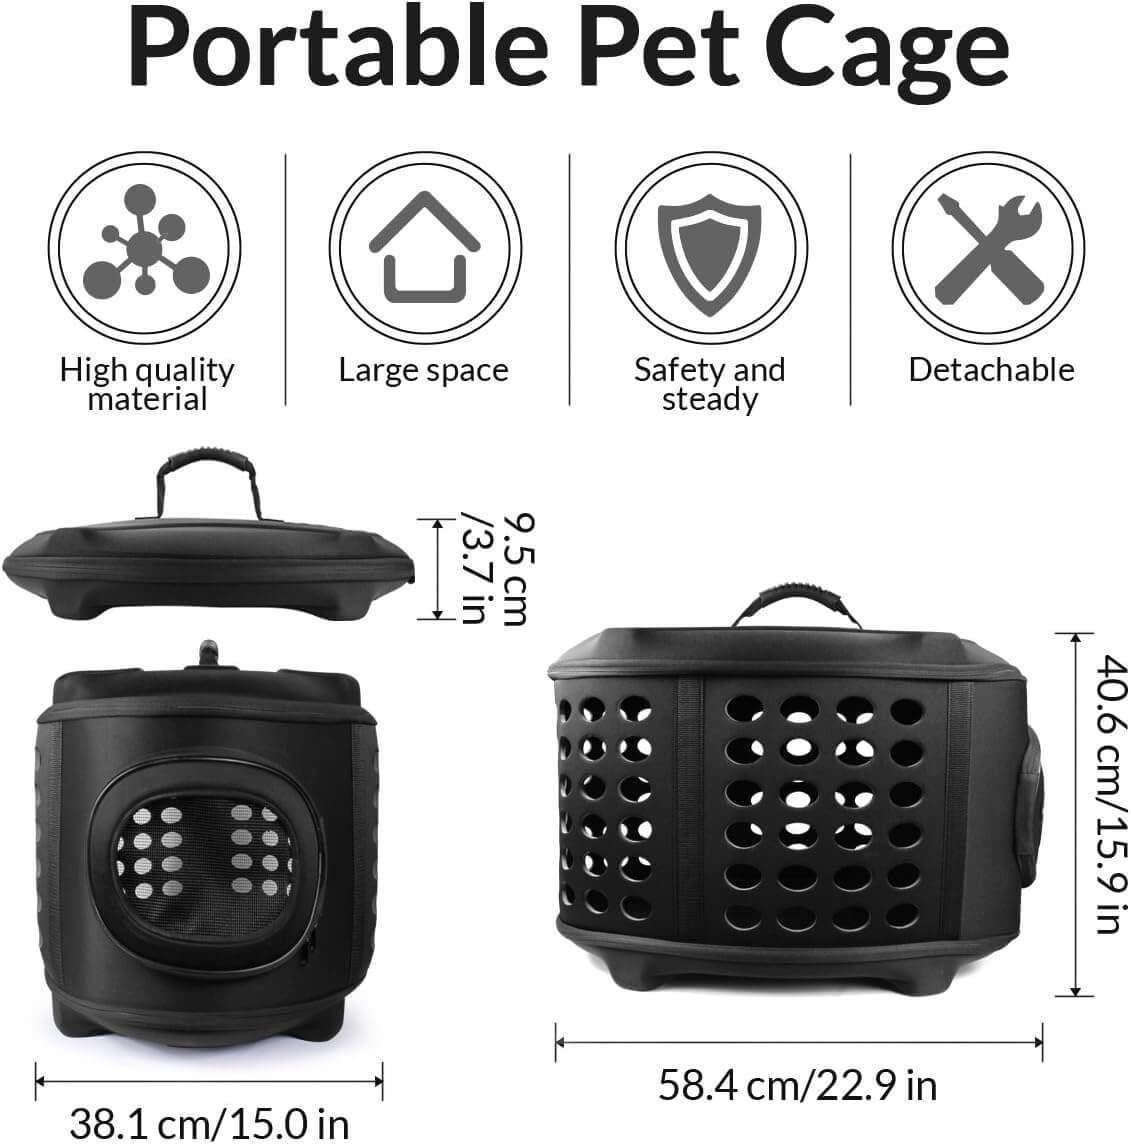 FRiEQ 23-Inch Large Hard Cover Pet Carrier - Pet Travel Kennel for Cats, Small Dogs & Rabbits - Portable Pet Cage